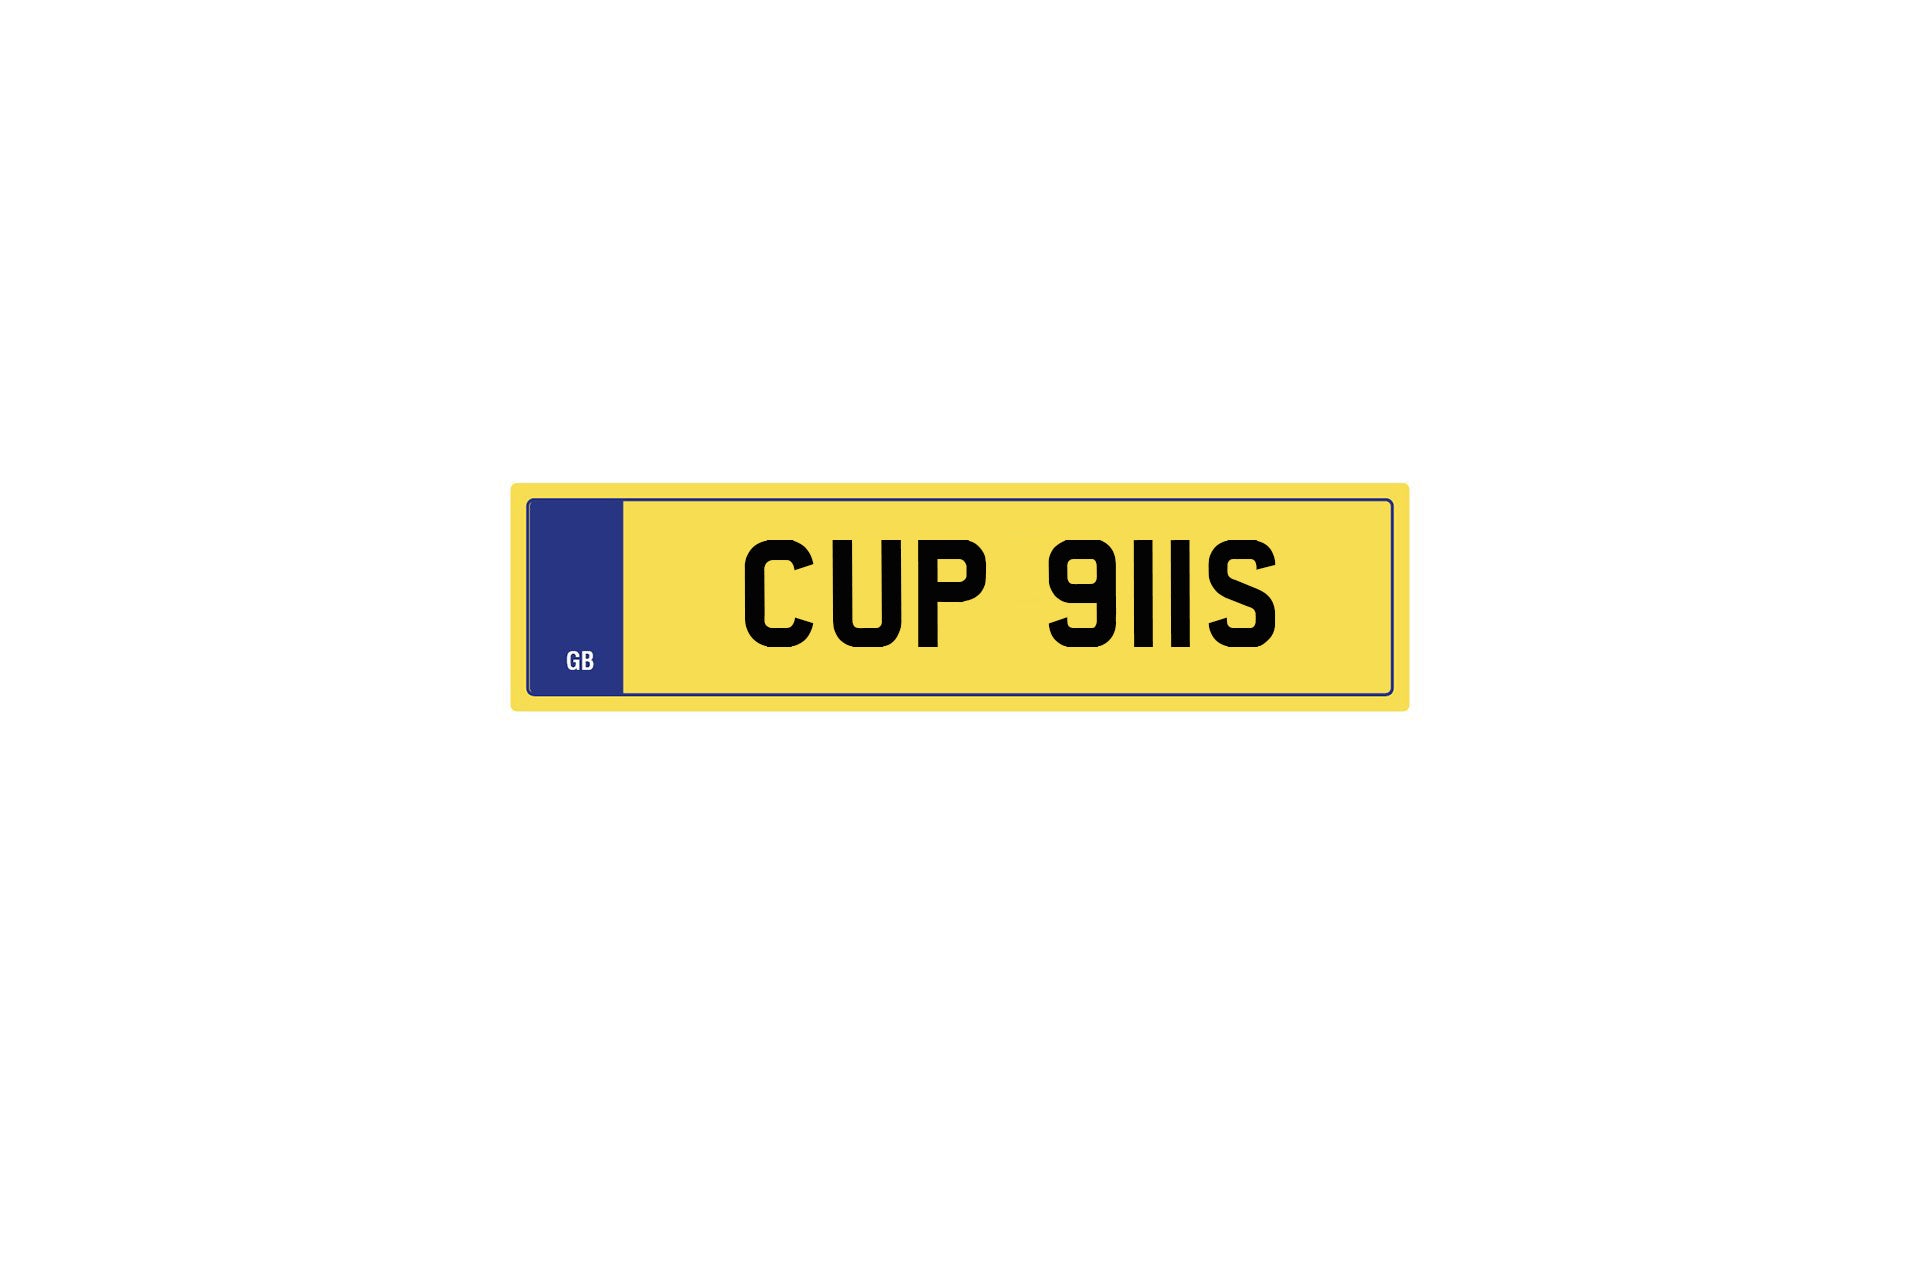 Private Plate CUP 911S